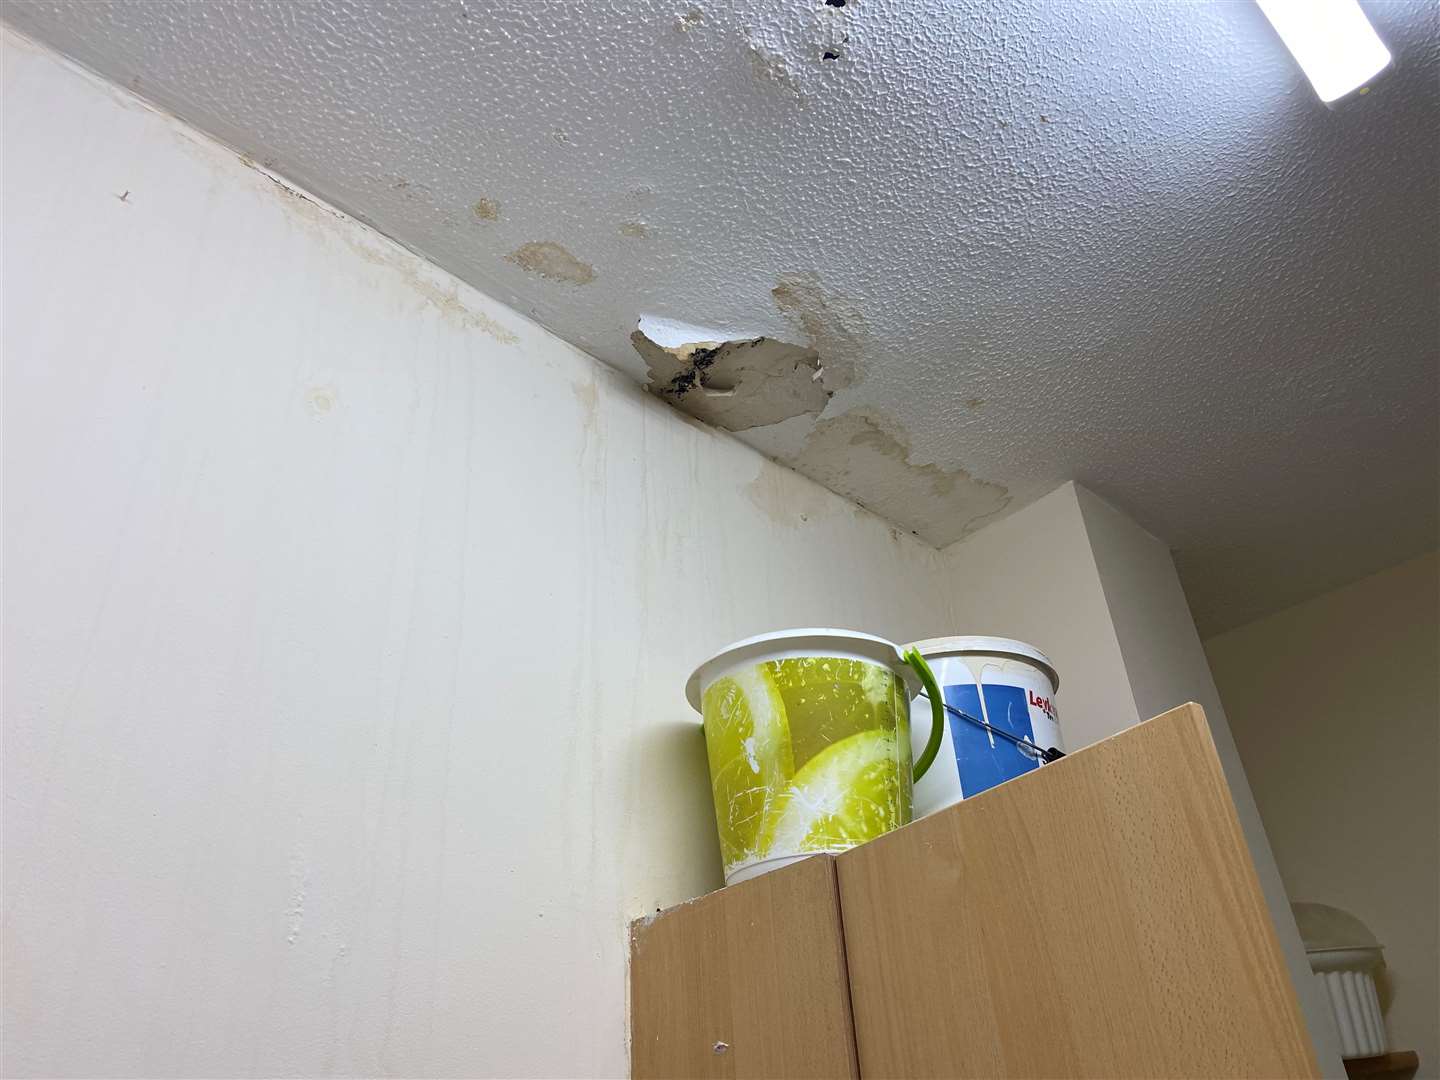 Water was coming through her ceiling from the flat above